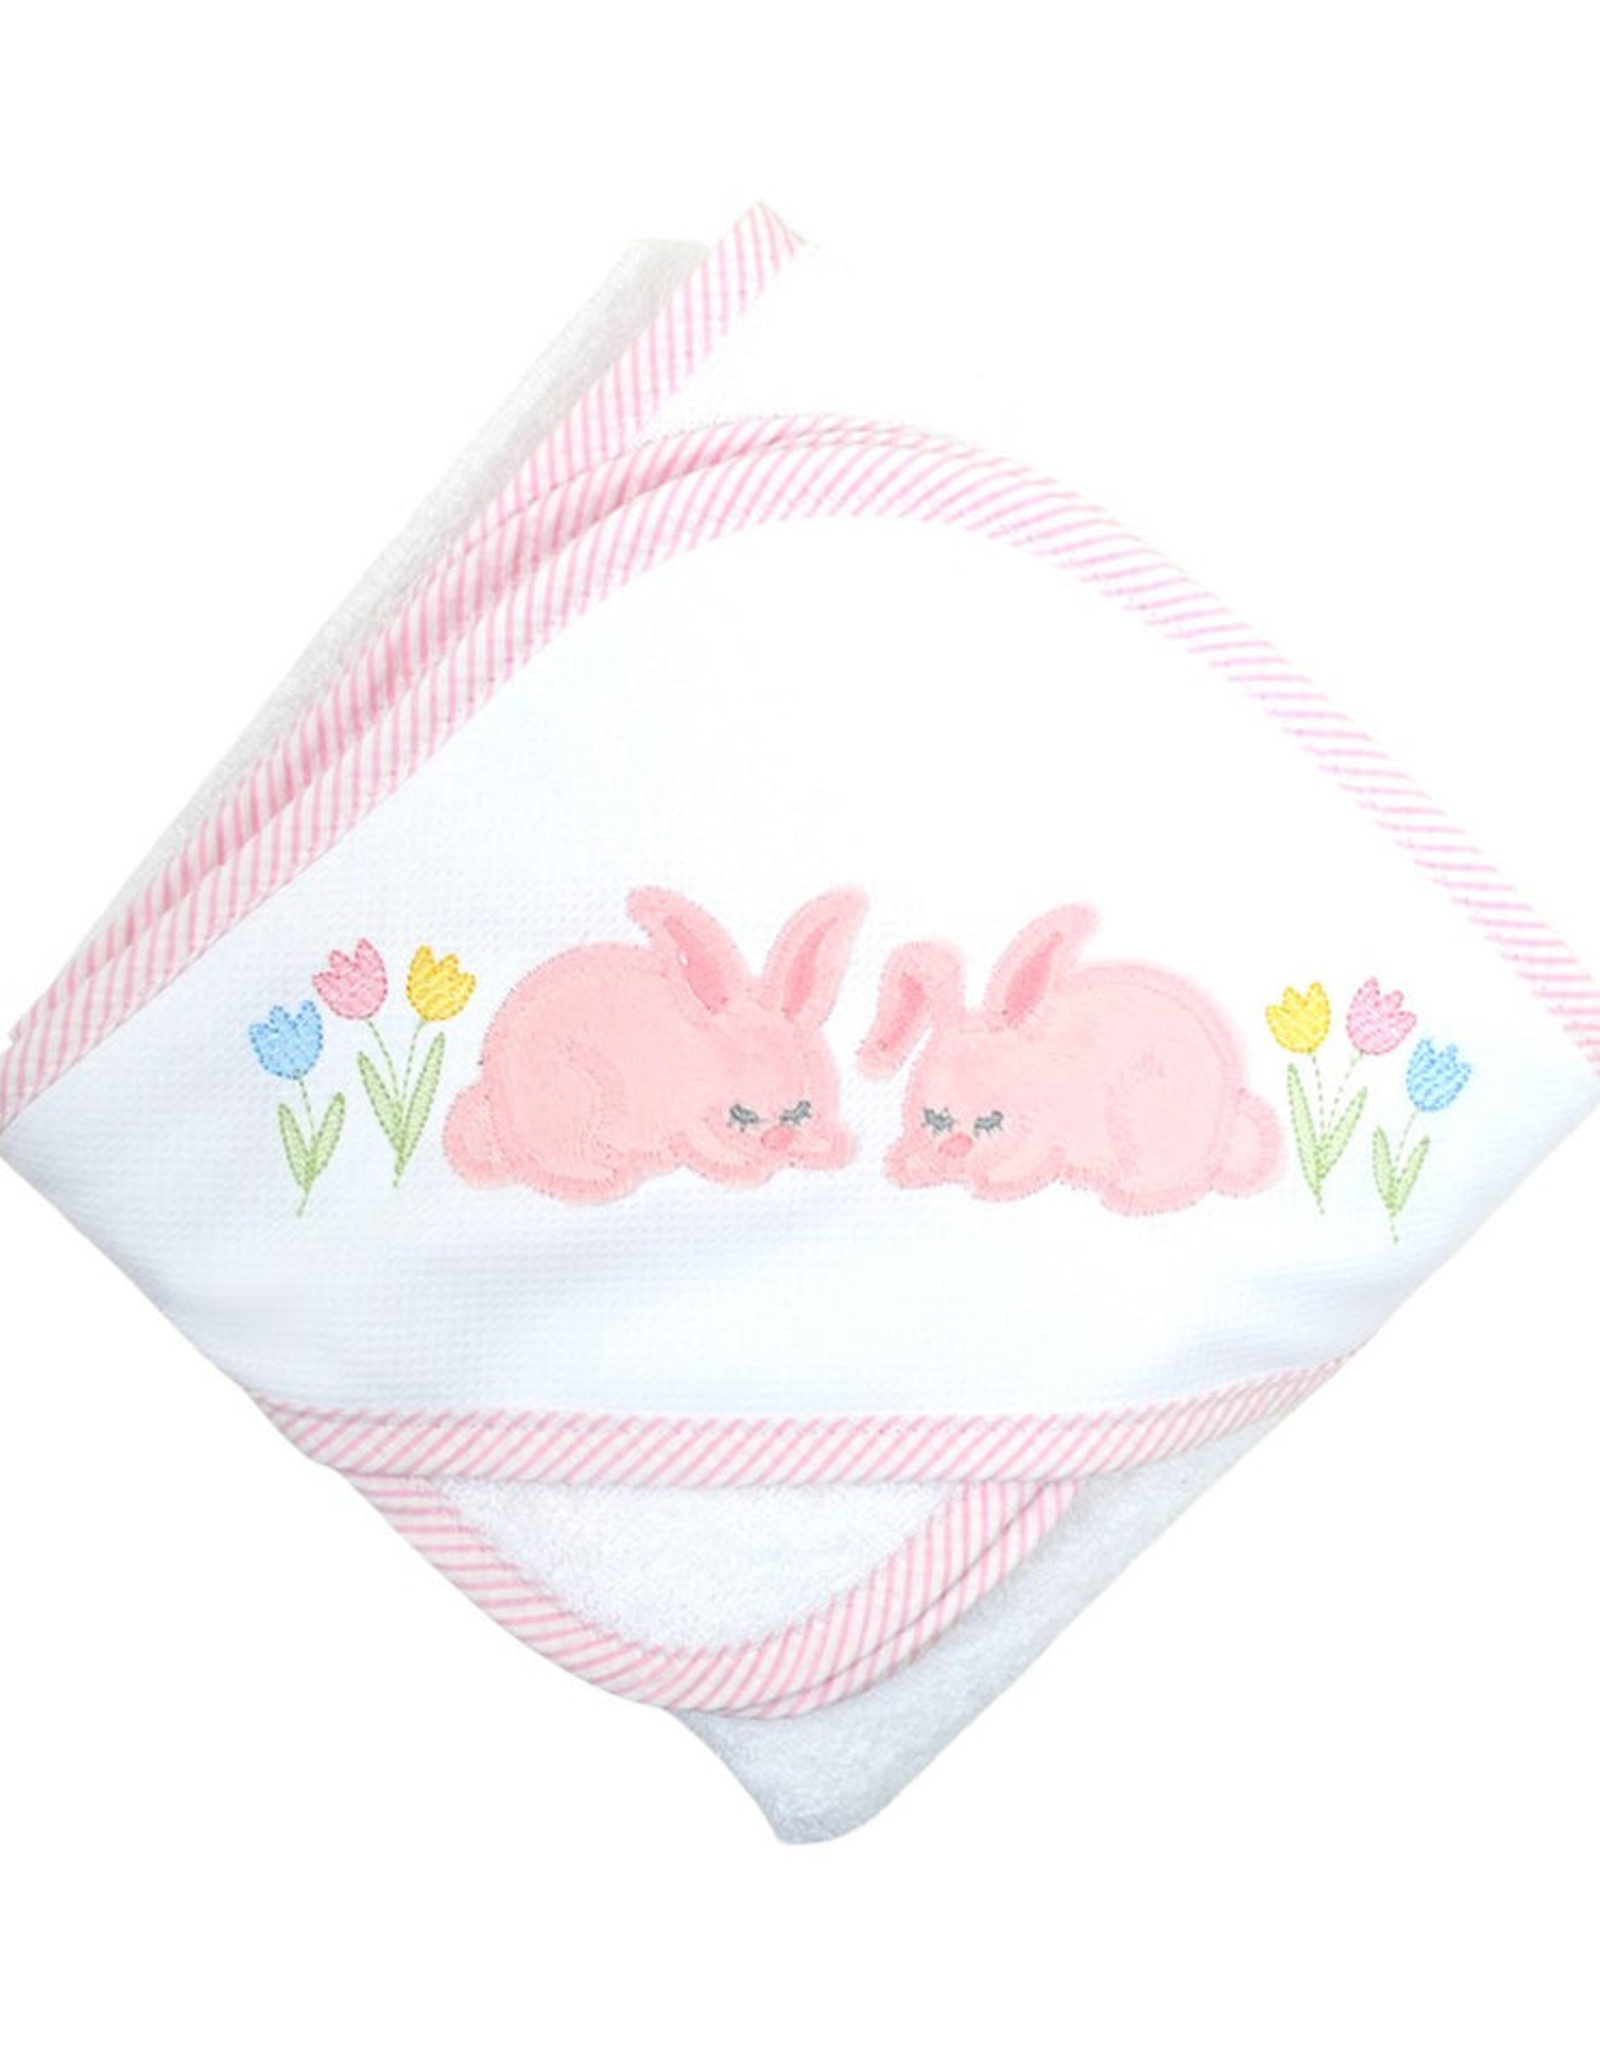 3 Marthas 3M Boxed Hooded Towel Set Pink Bunny